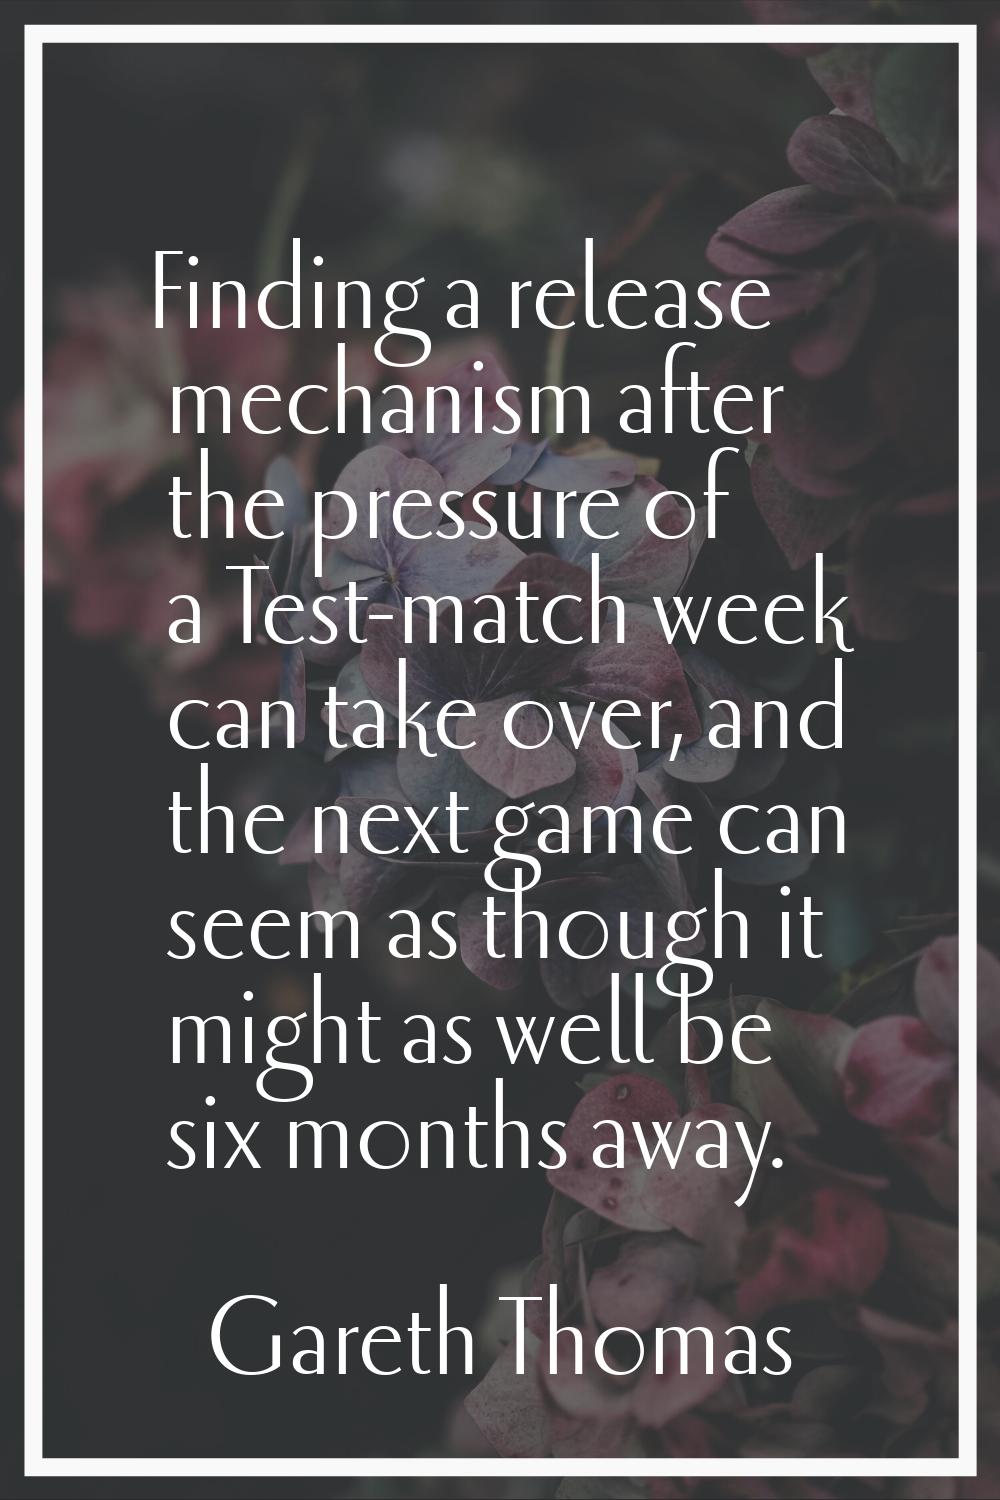 Finding a release mechanism after the pressure of a Test-match week can take over, and the next gam